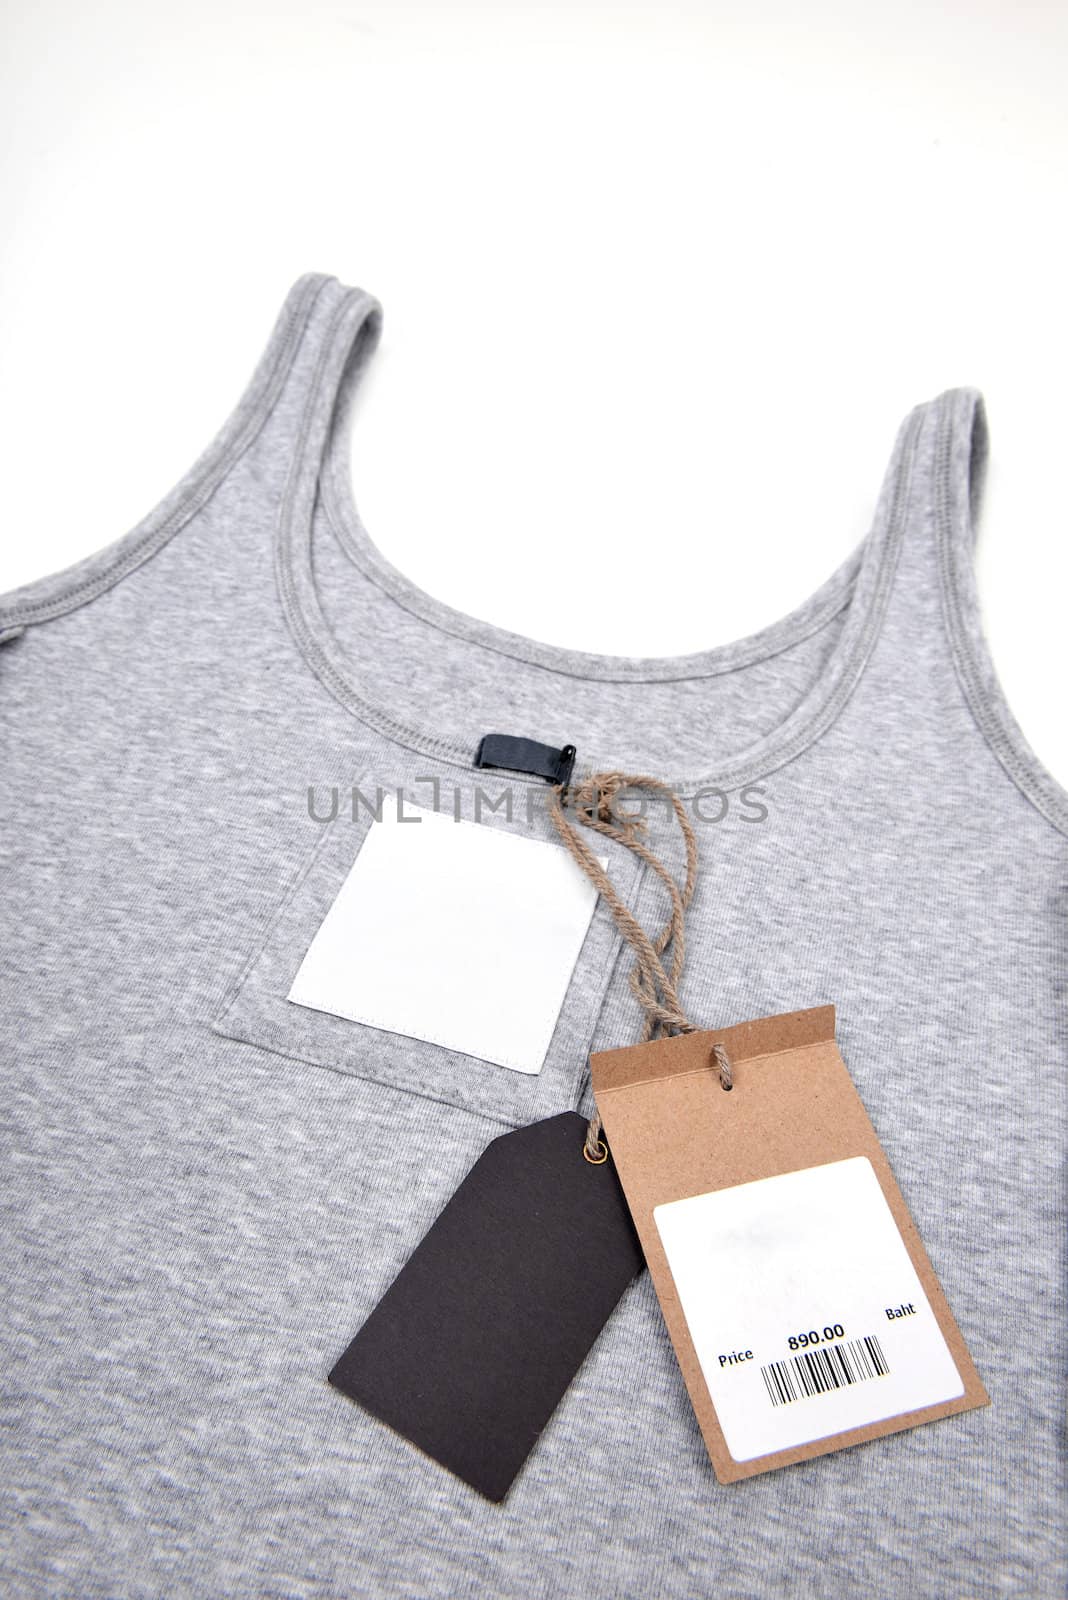 undershirt with price tag on white background